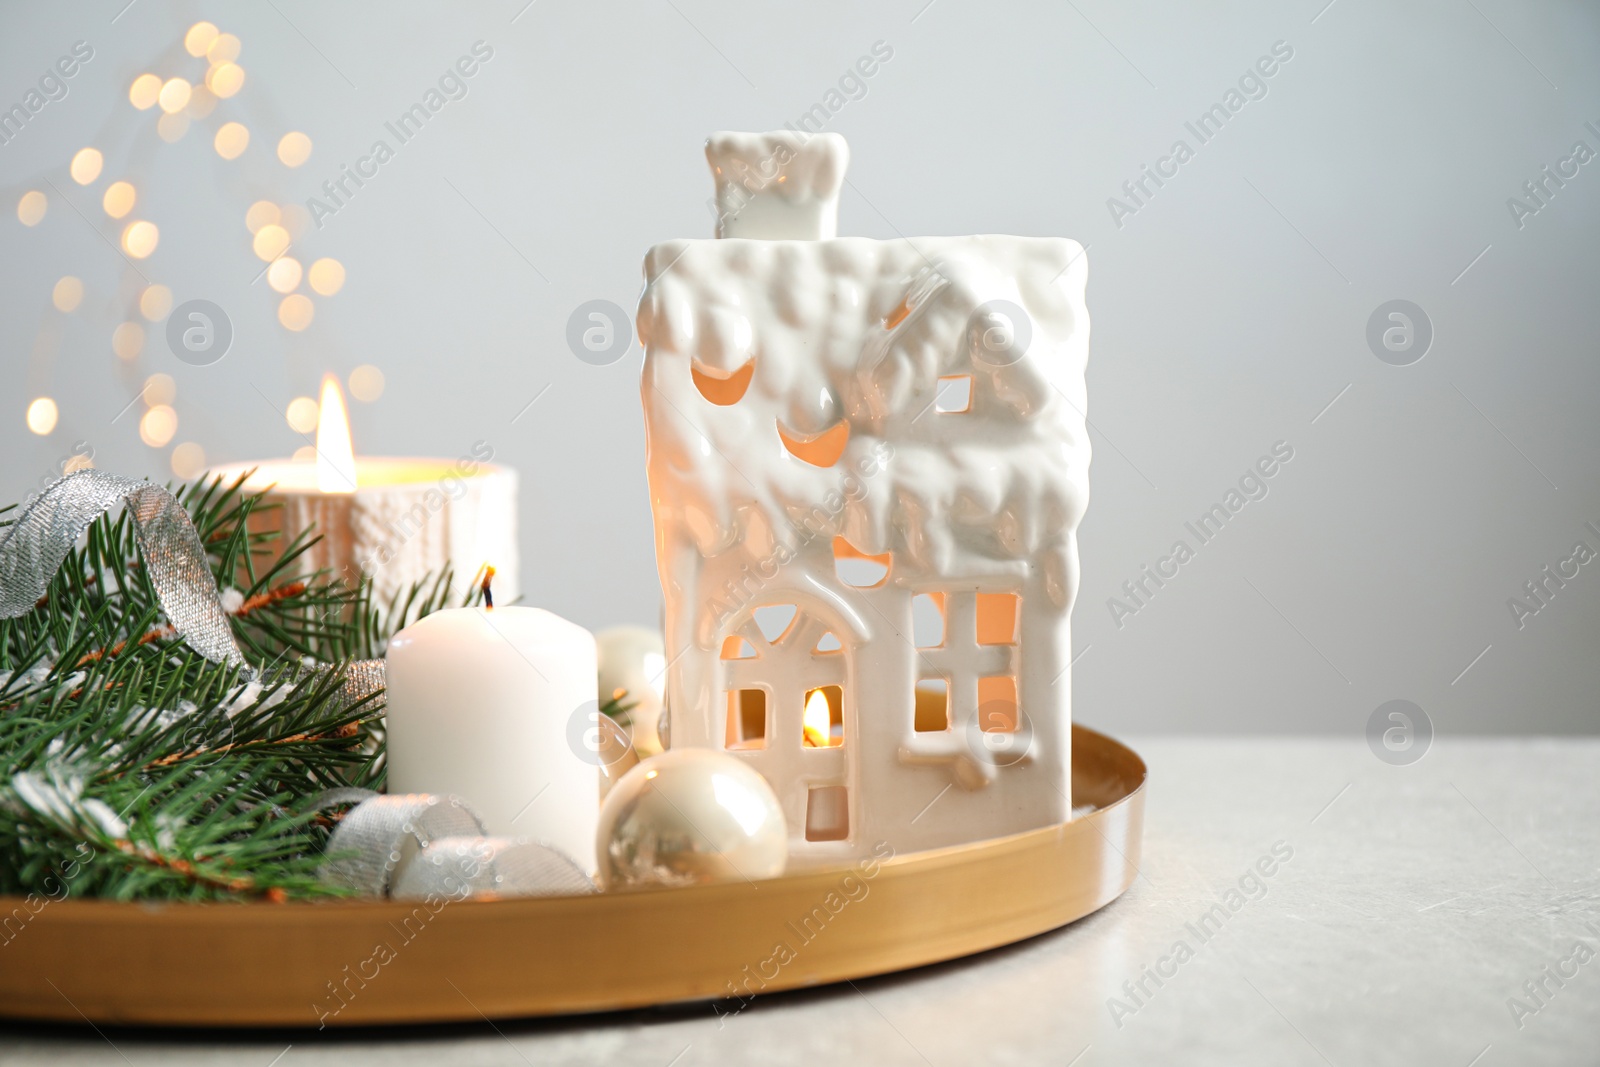 Photo of Composition with house shaped candle holder on grey table against blurred background. Christmas decoration